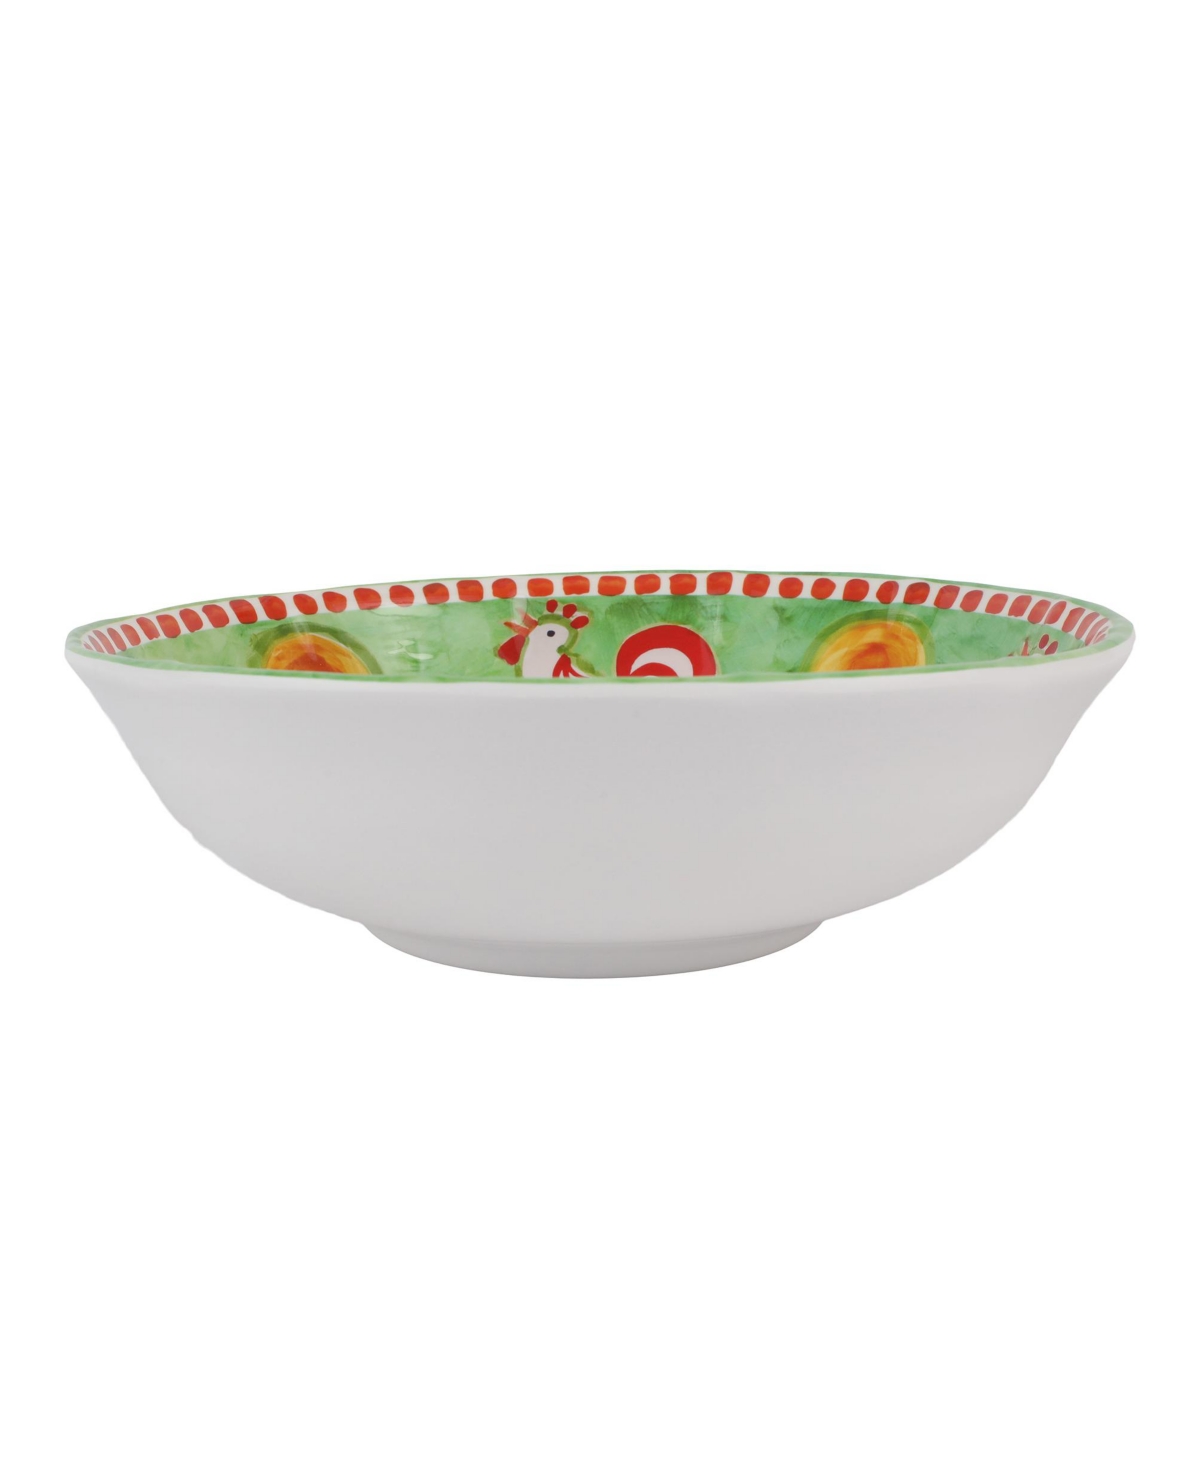 Vietri Melamine Campagna Gallina Large Serving Bowl In Open Misce